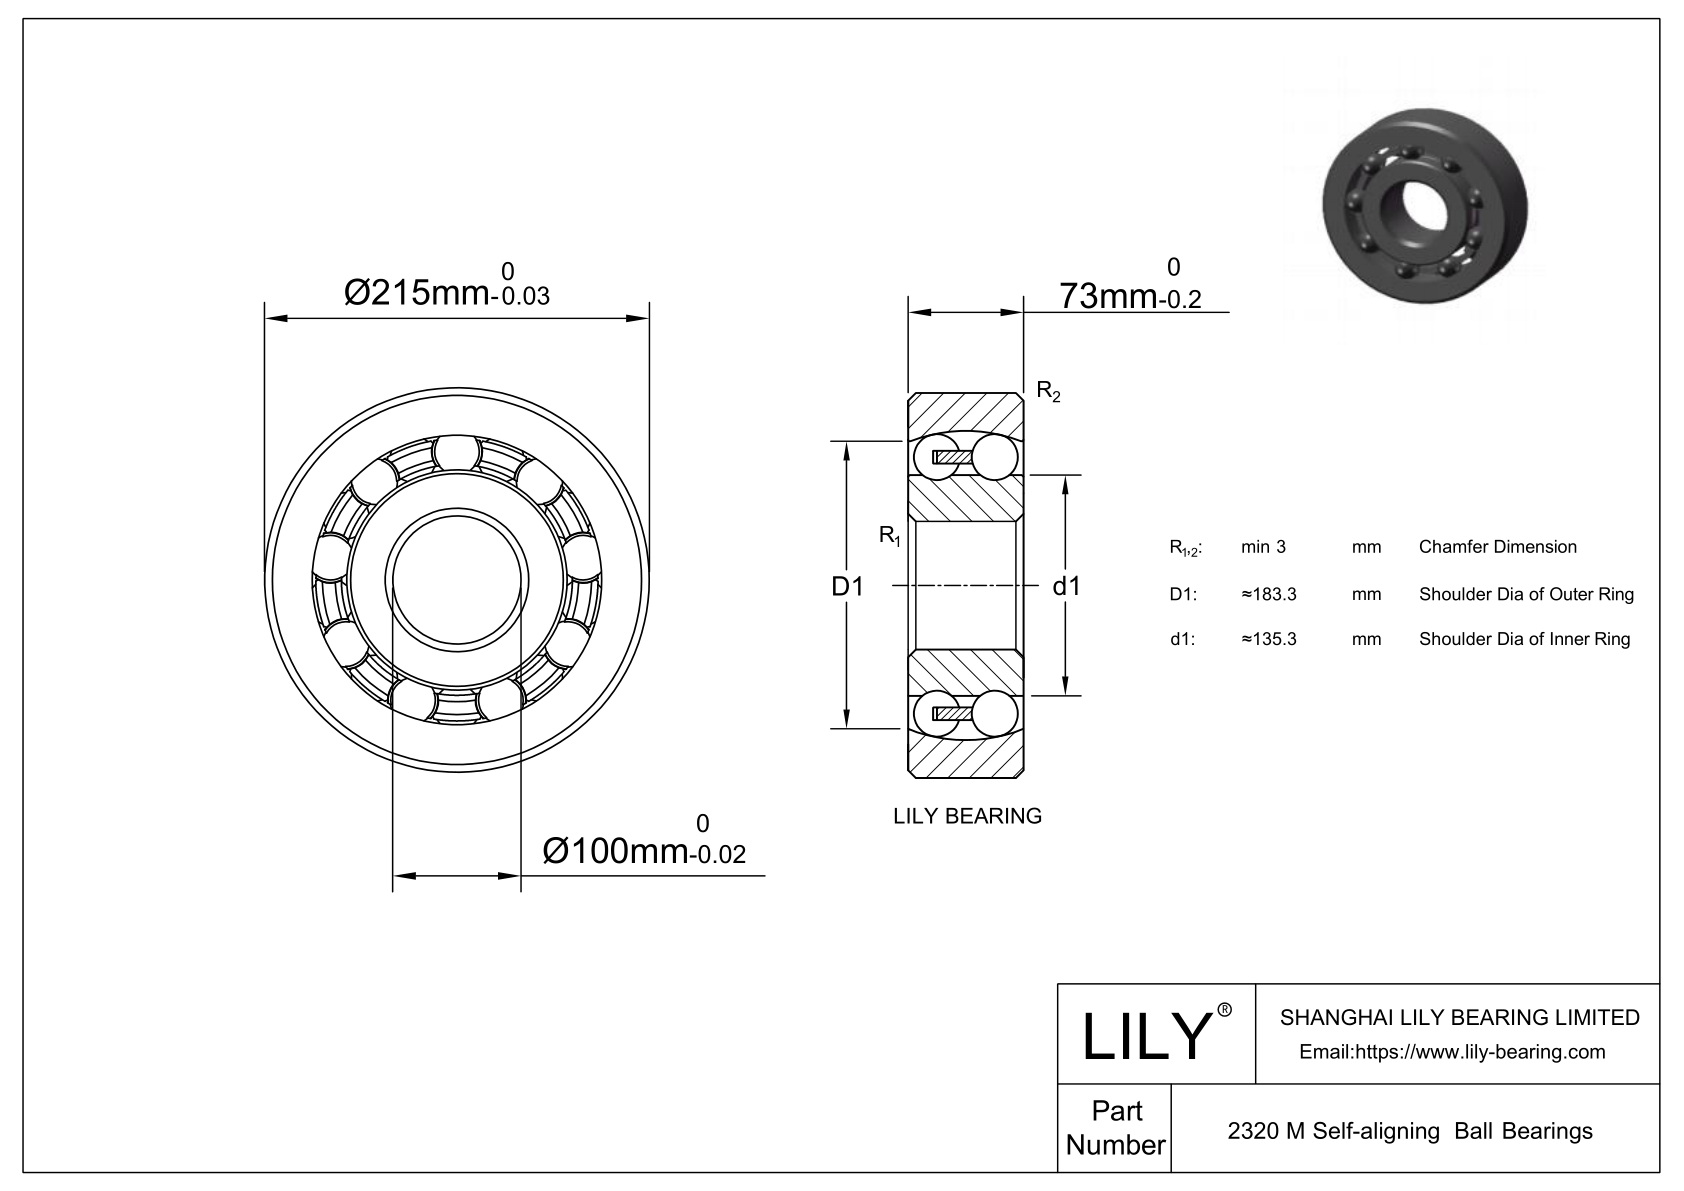 S2320 M Stainless Steel Self Aligning Ball Bearings cad drawing